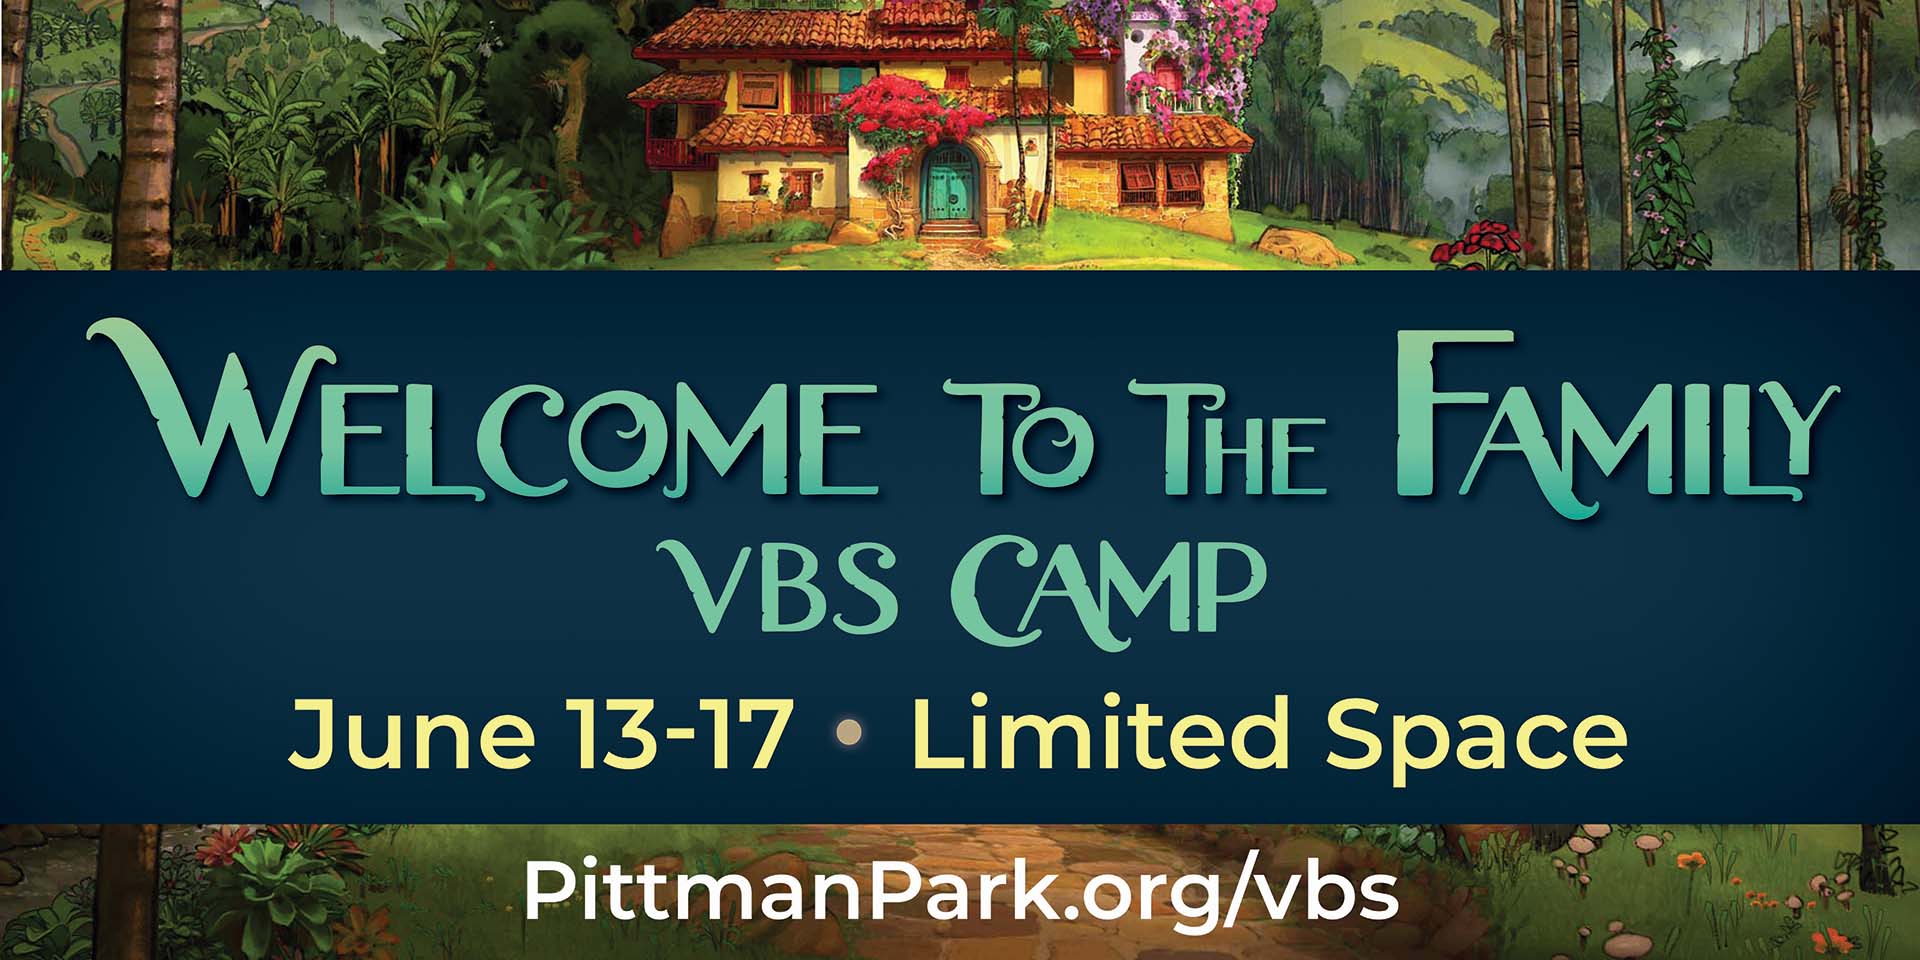 Pittman Park Welcome to the Family VBS Camp June 13-17 2022, 9-noon